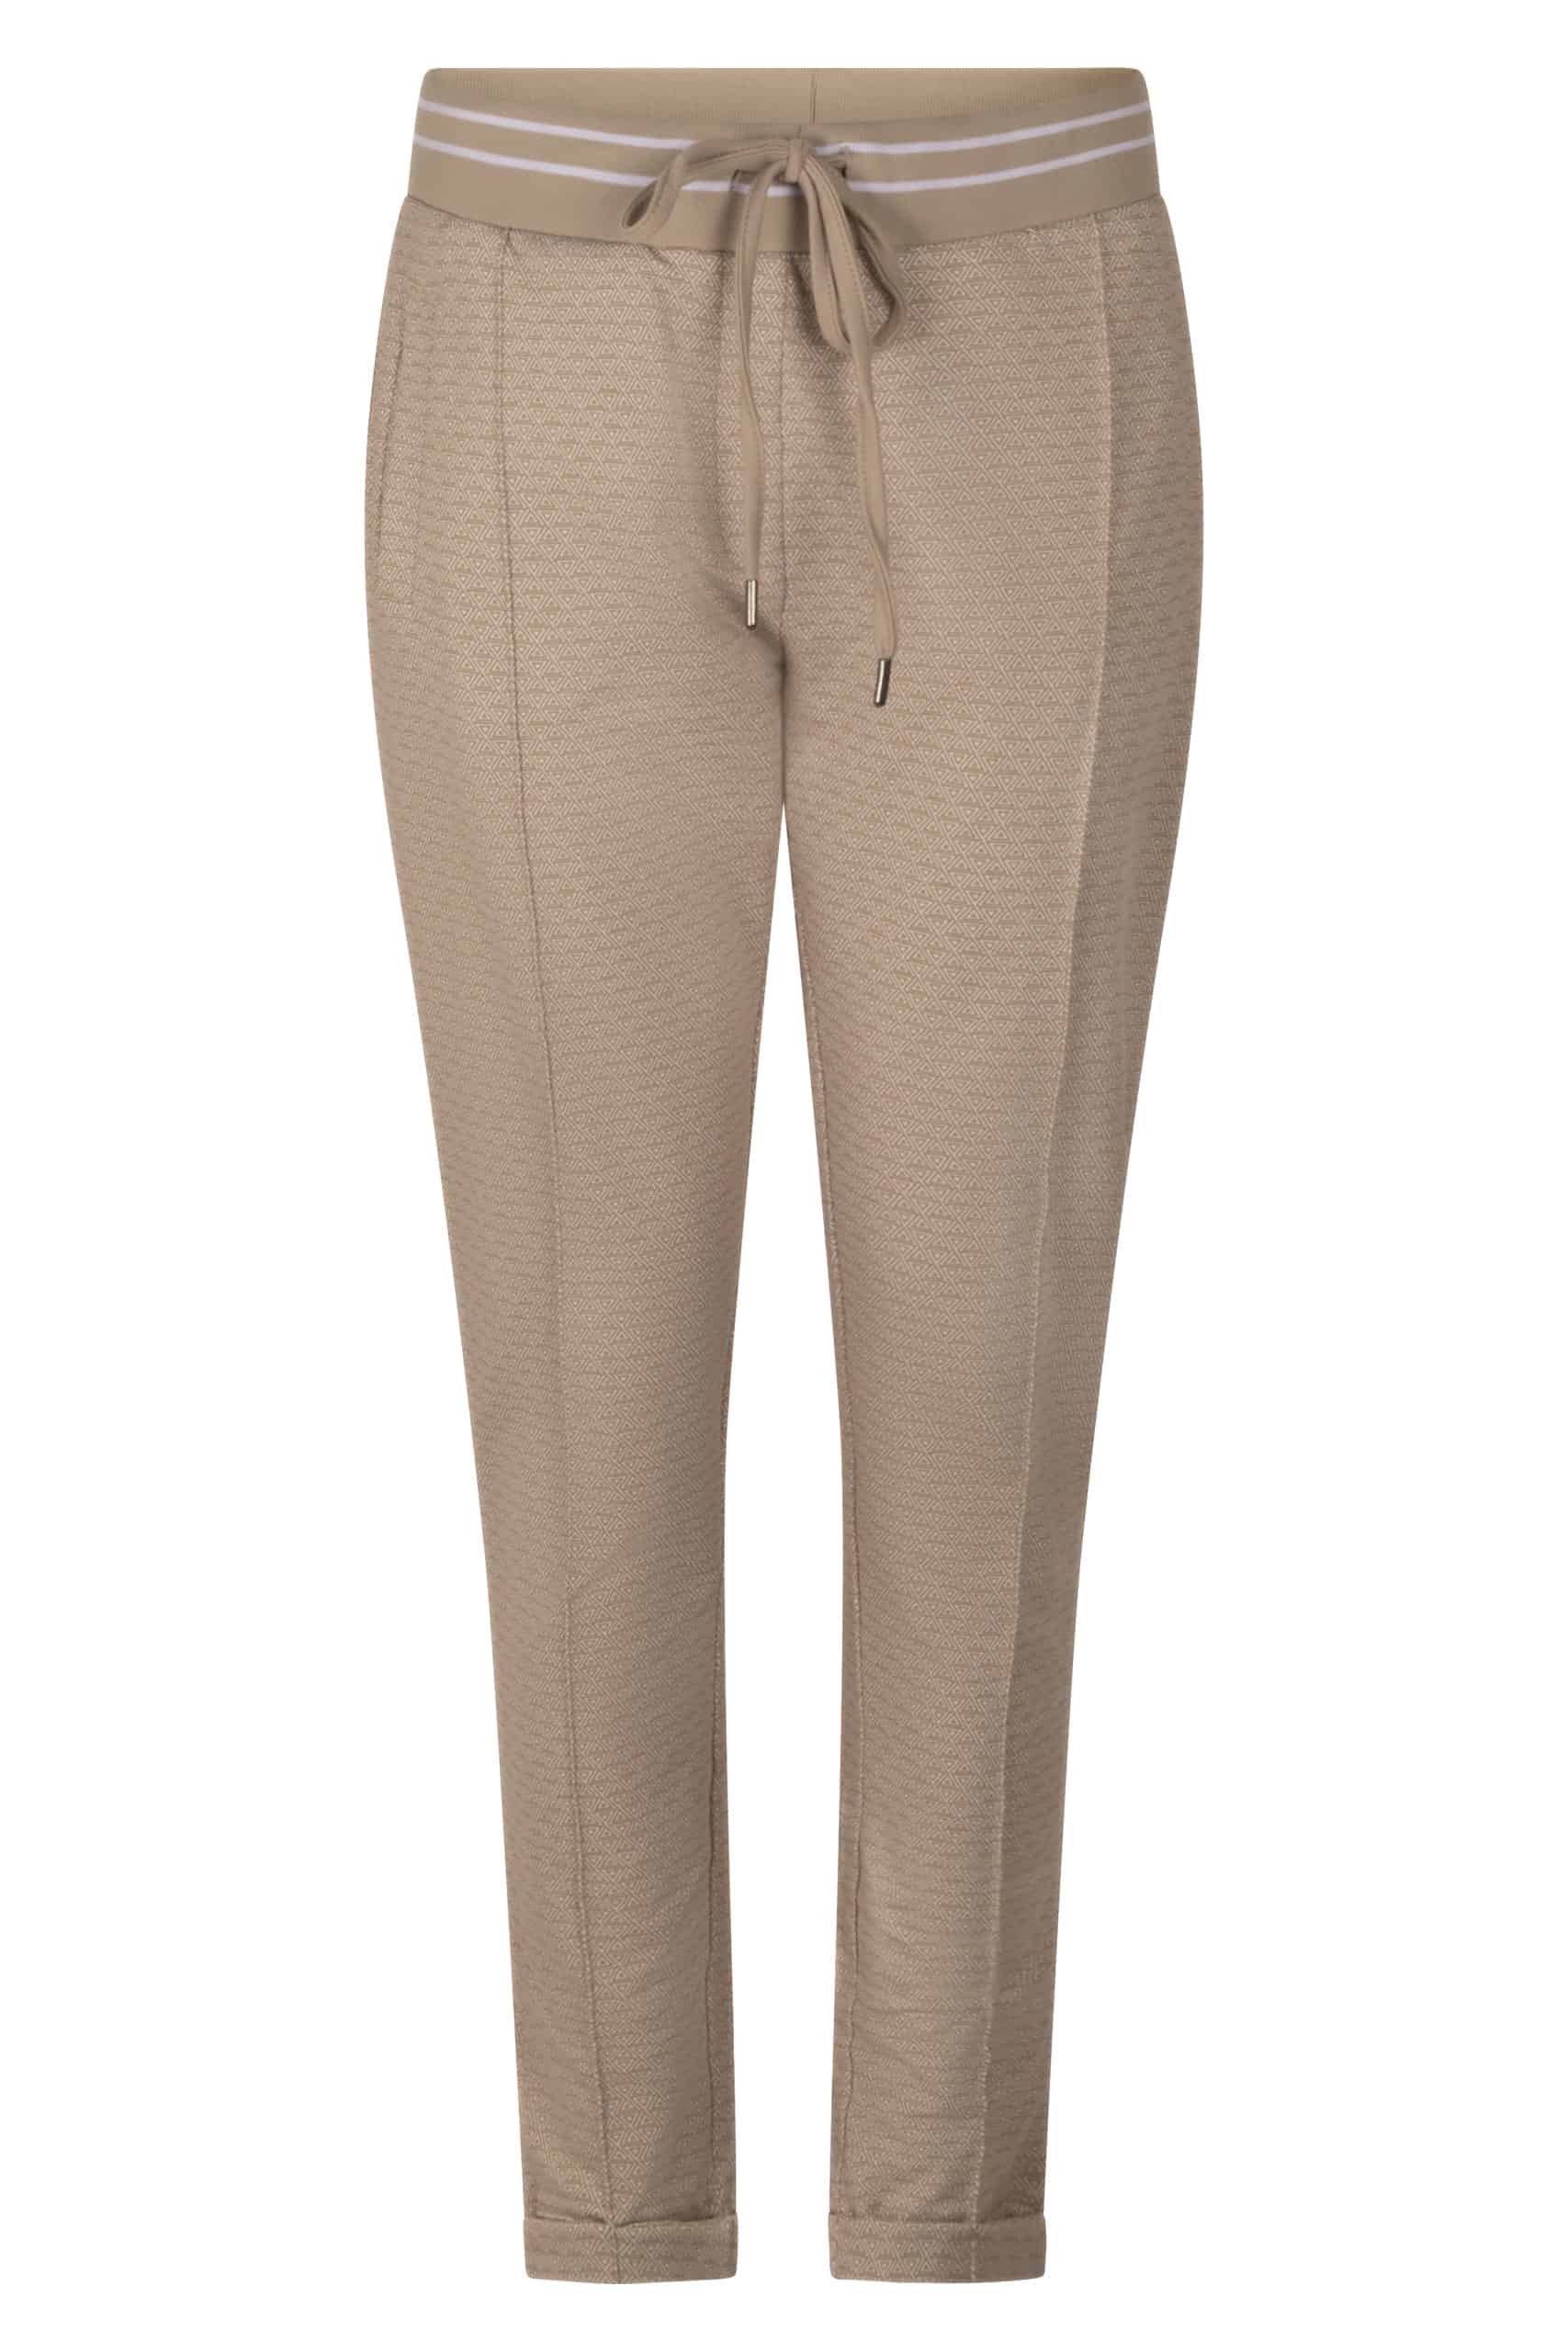 Zoso 222 Judy Allover Printed Pant Sand/White